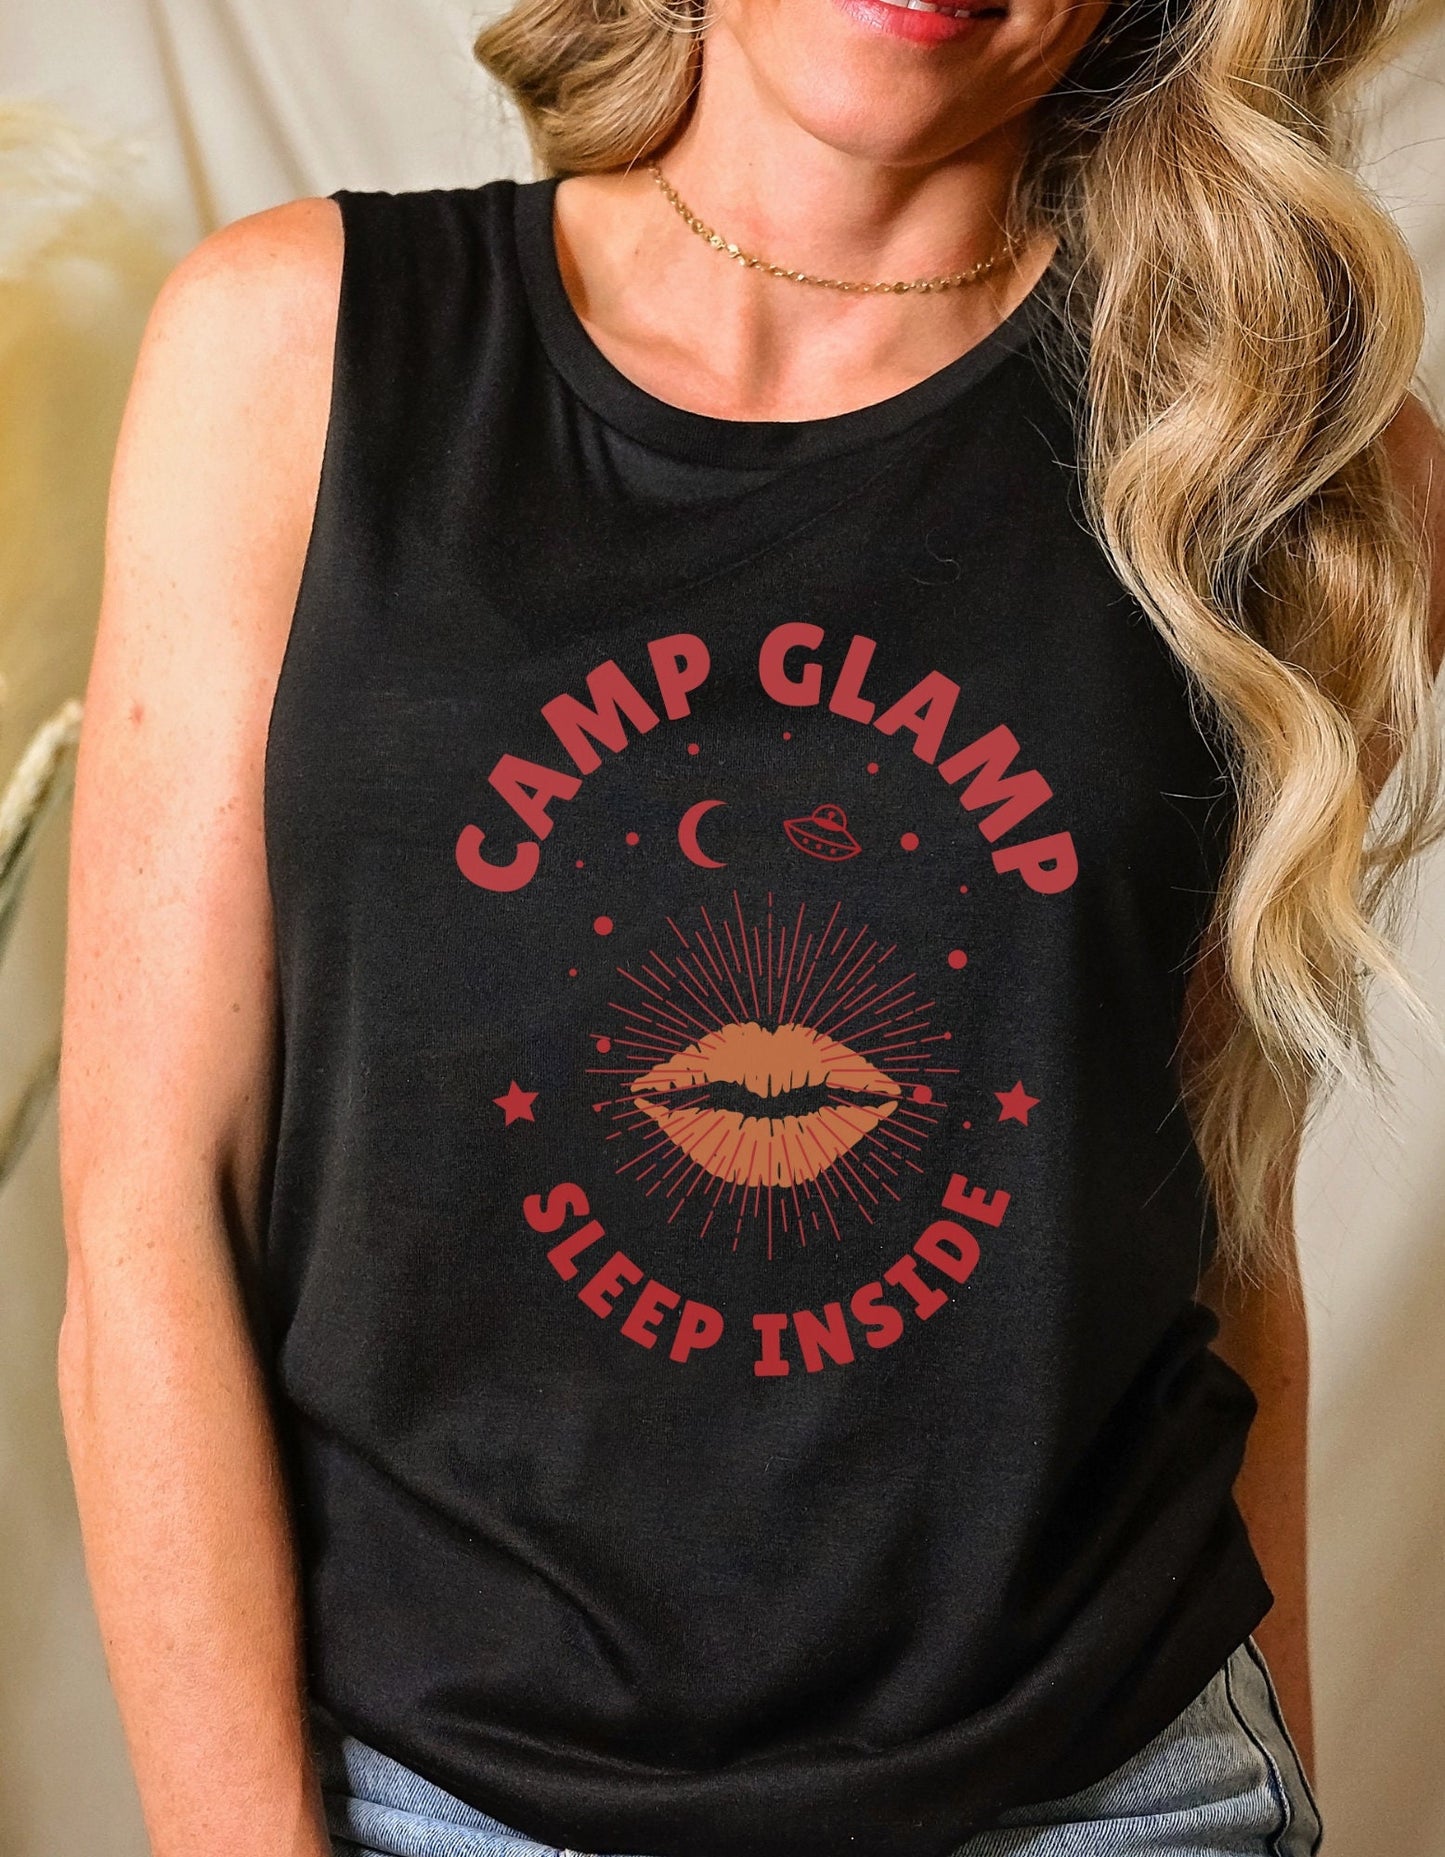 Camp Glamp Camping Glamping TShirt Retro Camper Glamper Gift Shirt Star Girl Aesthetic Tank Top Witchy Style Cute Glamping Party Muscle Tee